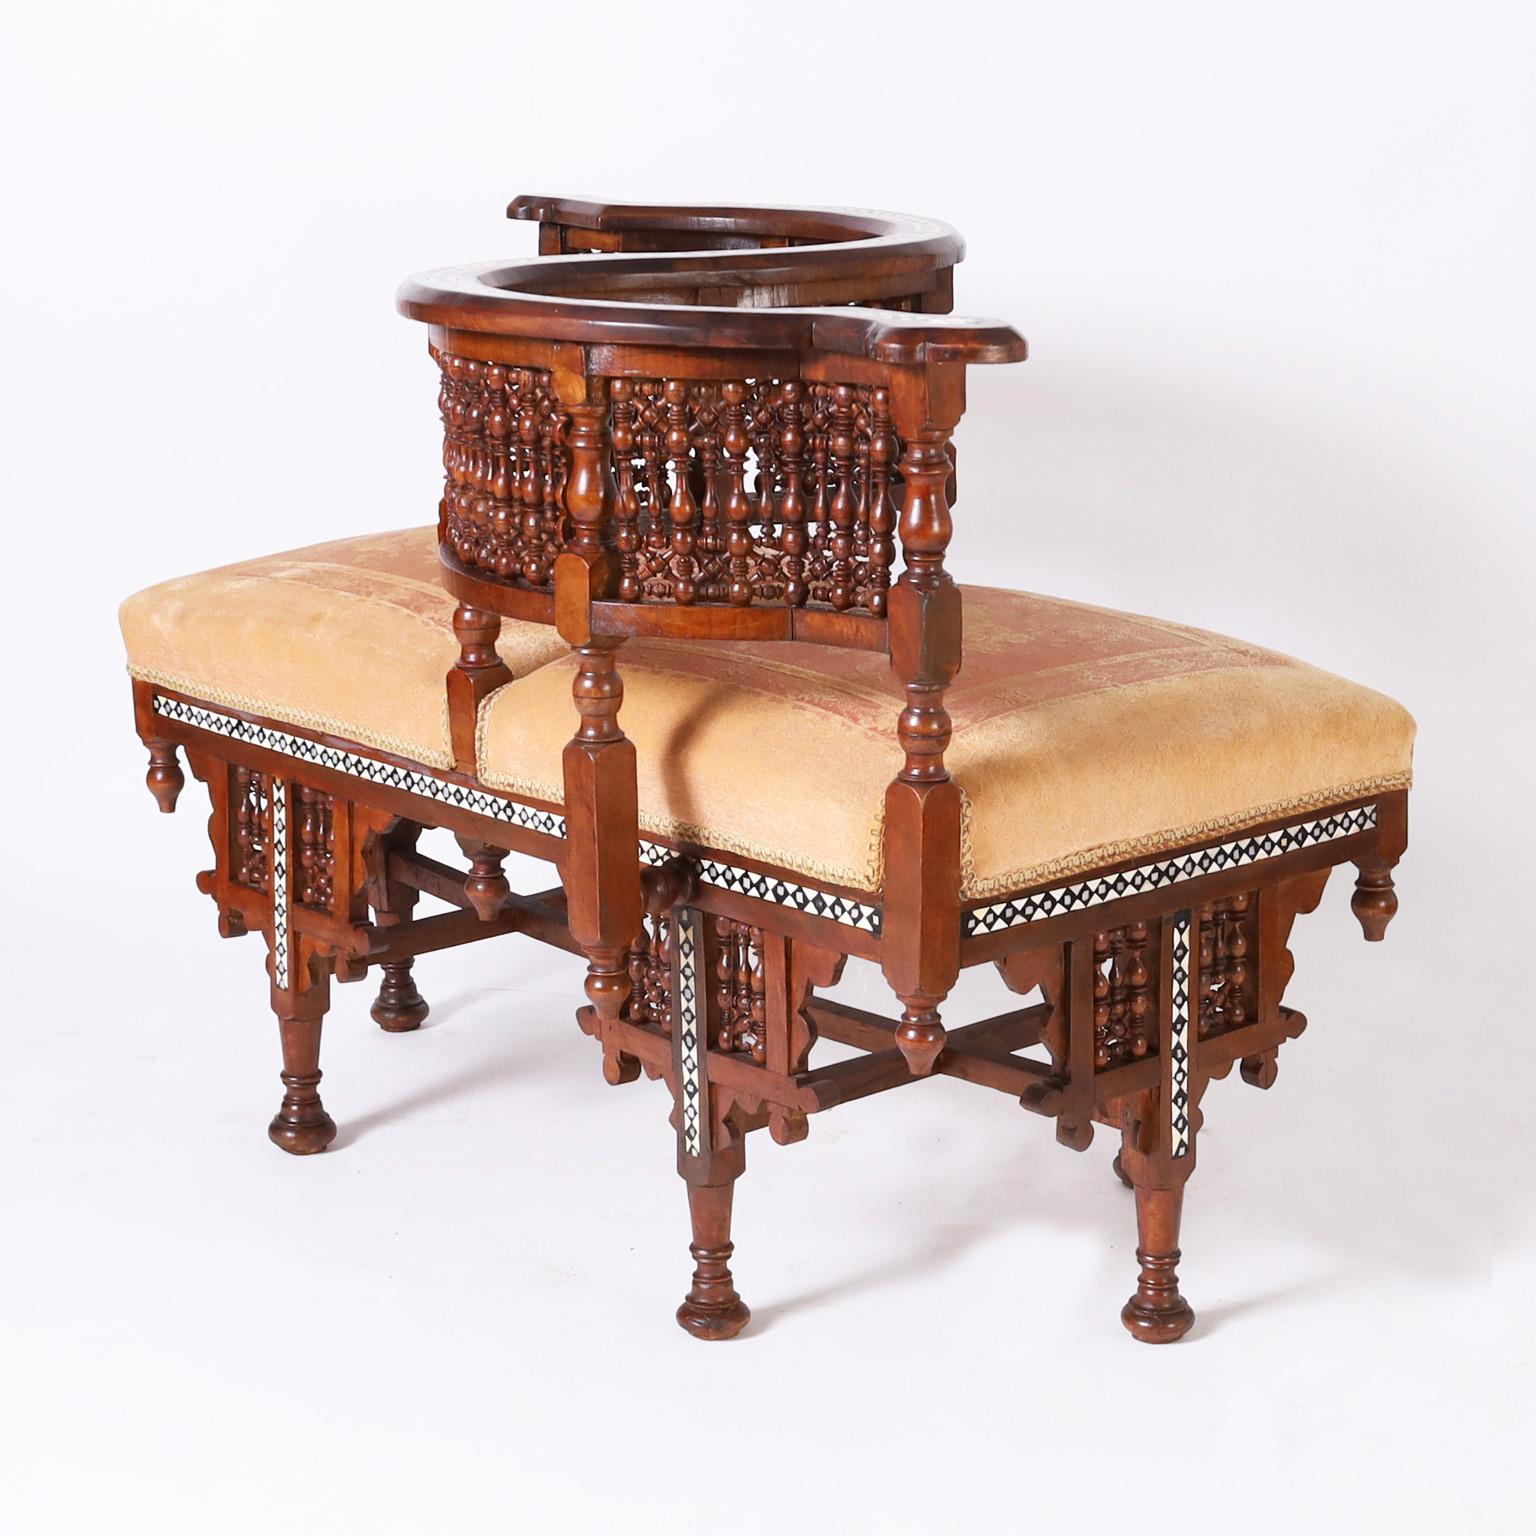 Rare and remarkable antique Moroccan tete-a-tete crafted in walnut in classic graceful form featuring geometric bone inlays, turned balustrades, stick and ball, custom floral upholstery, finials, and turned feet.